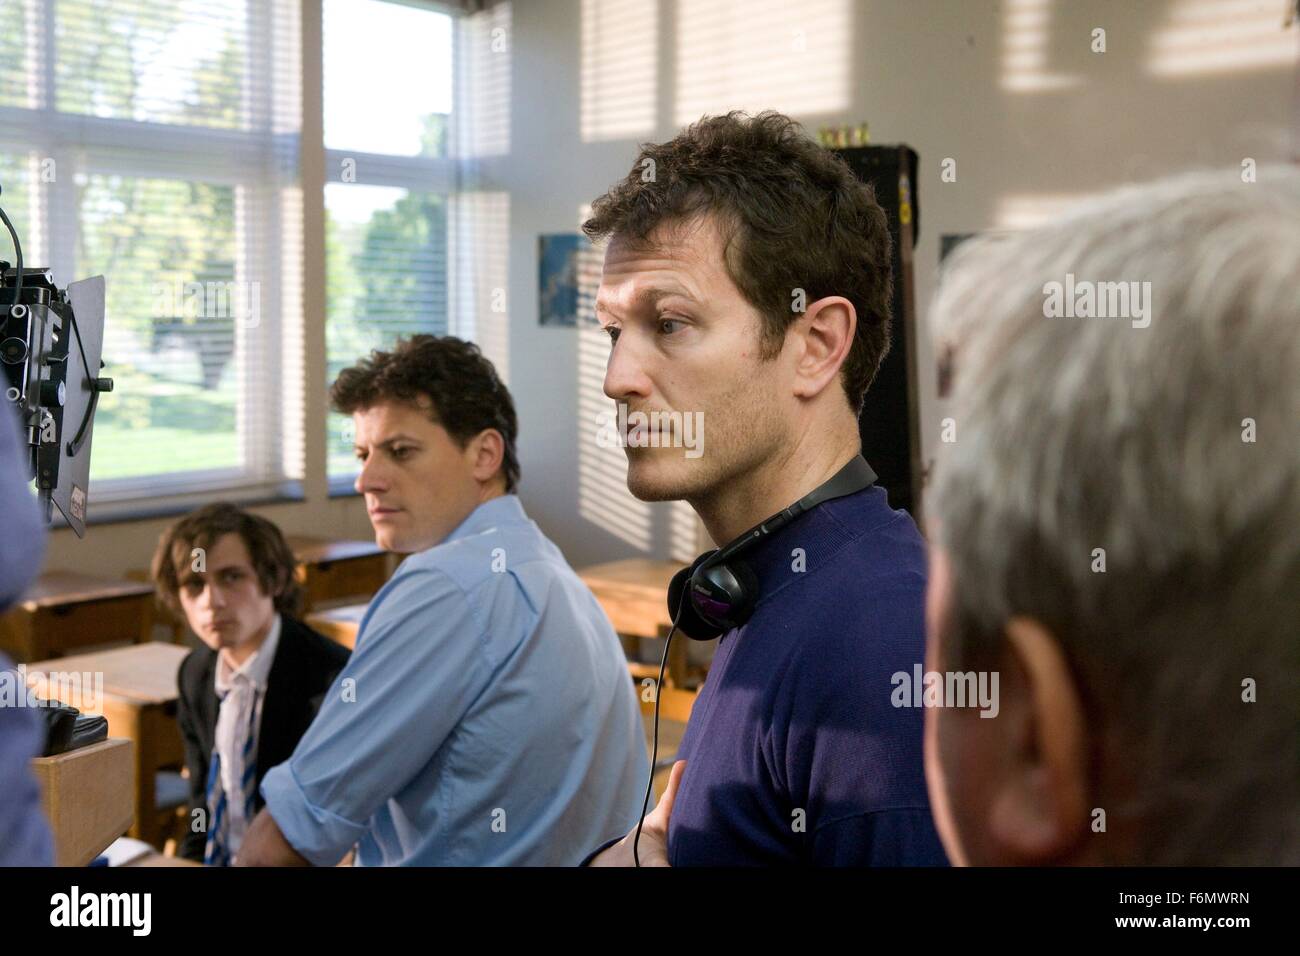 RELEASE DATE: 17 September 2010. TITLE: The Kid. STUDIO: Tin House Films. PLOT: About Kevin Lewis who grew up in poverty but survived to make a better life for himself and his family. PICTURED: IOAN GRUFFUDD as Colin Smith with Director NICK MORAN. Stock Photo